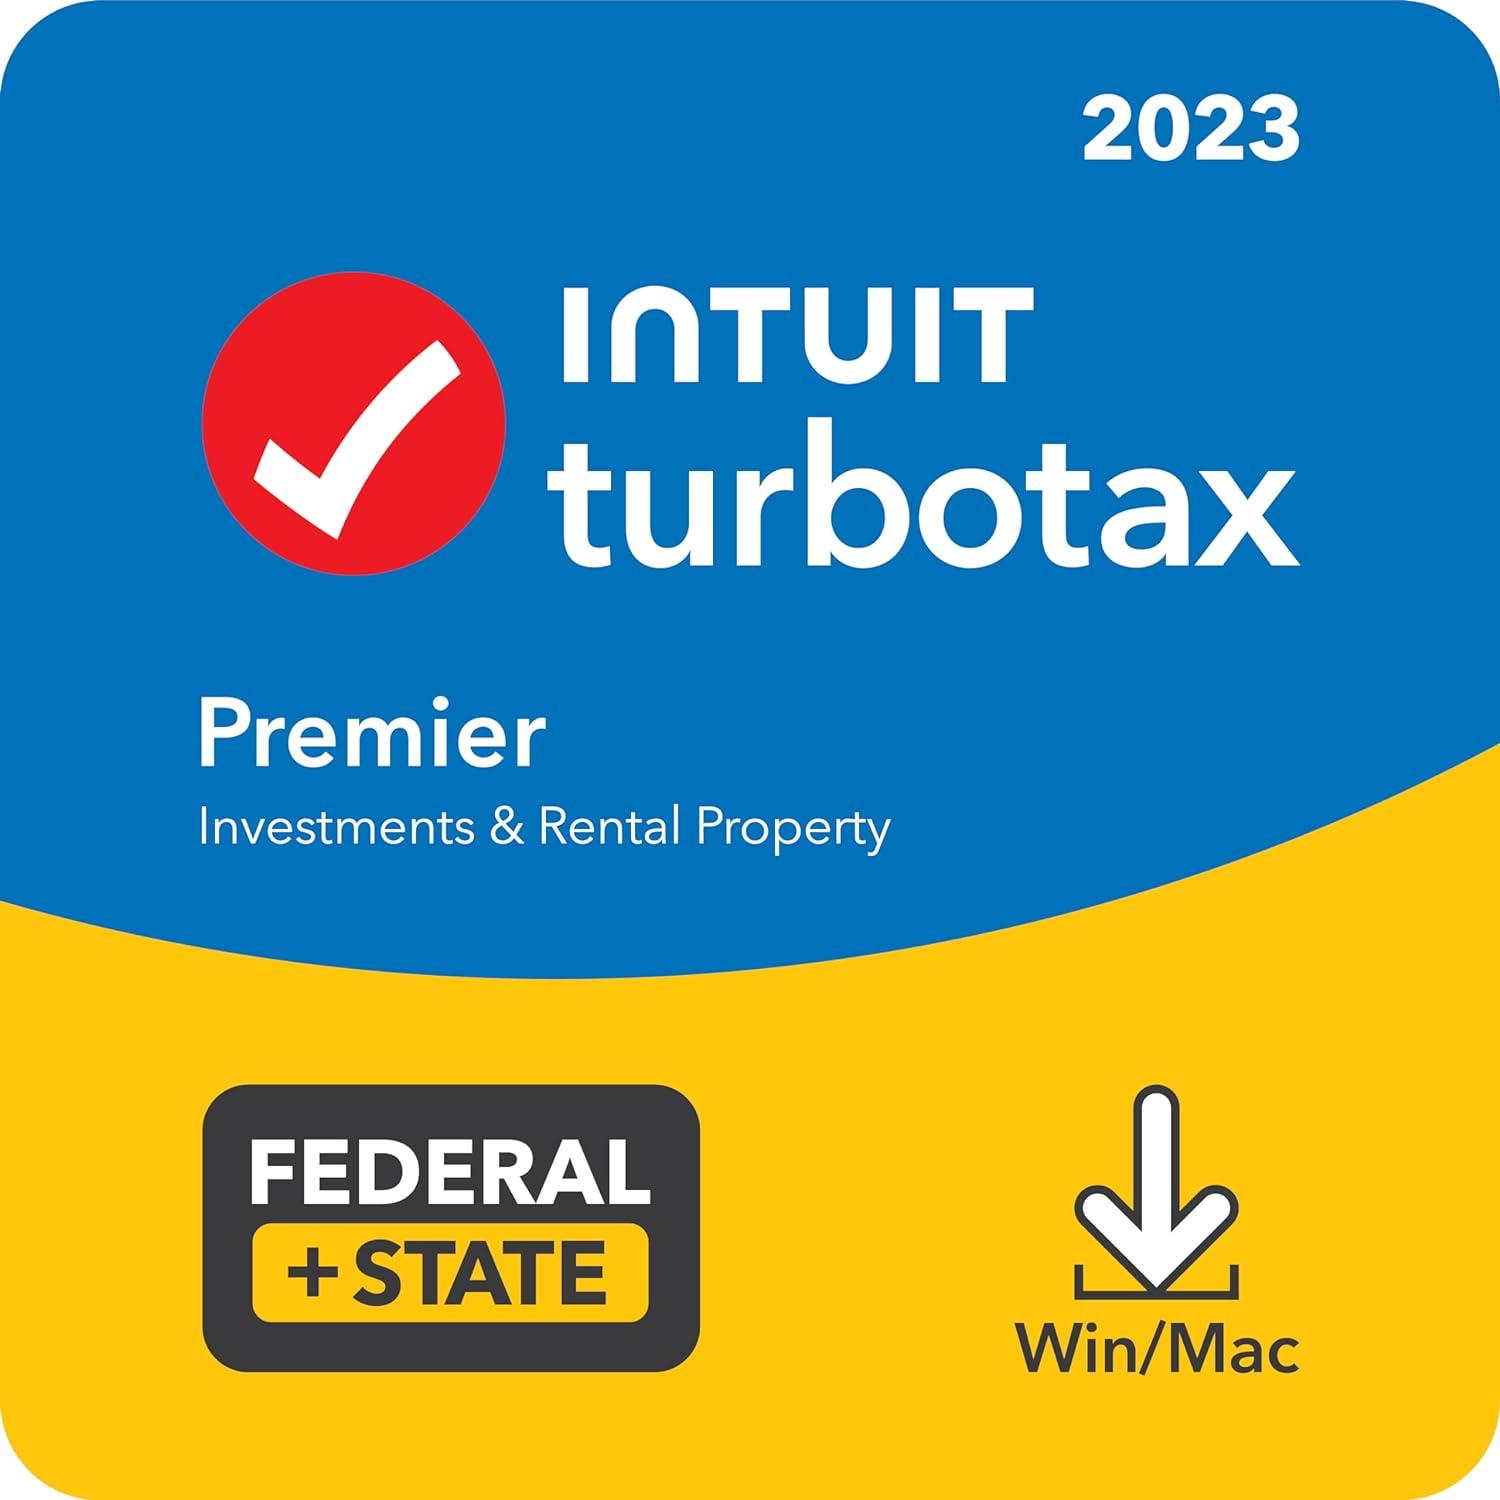 TurboTax Premier Federal + State 2023 for $64.99